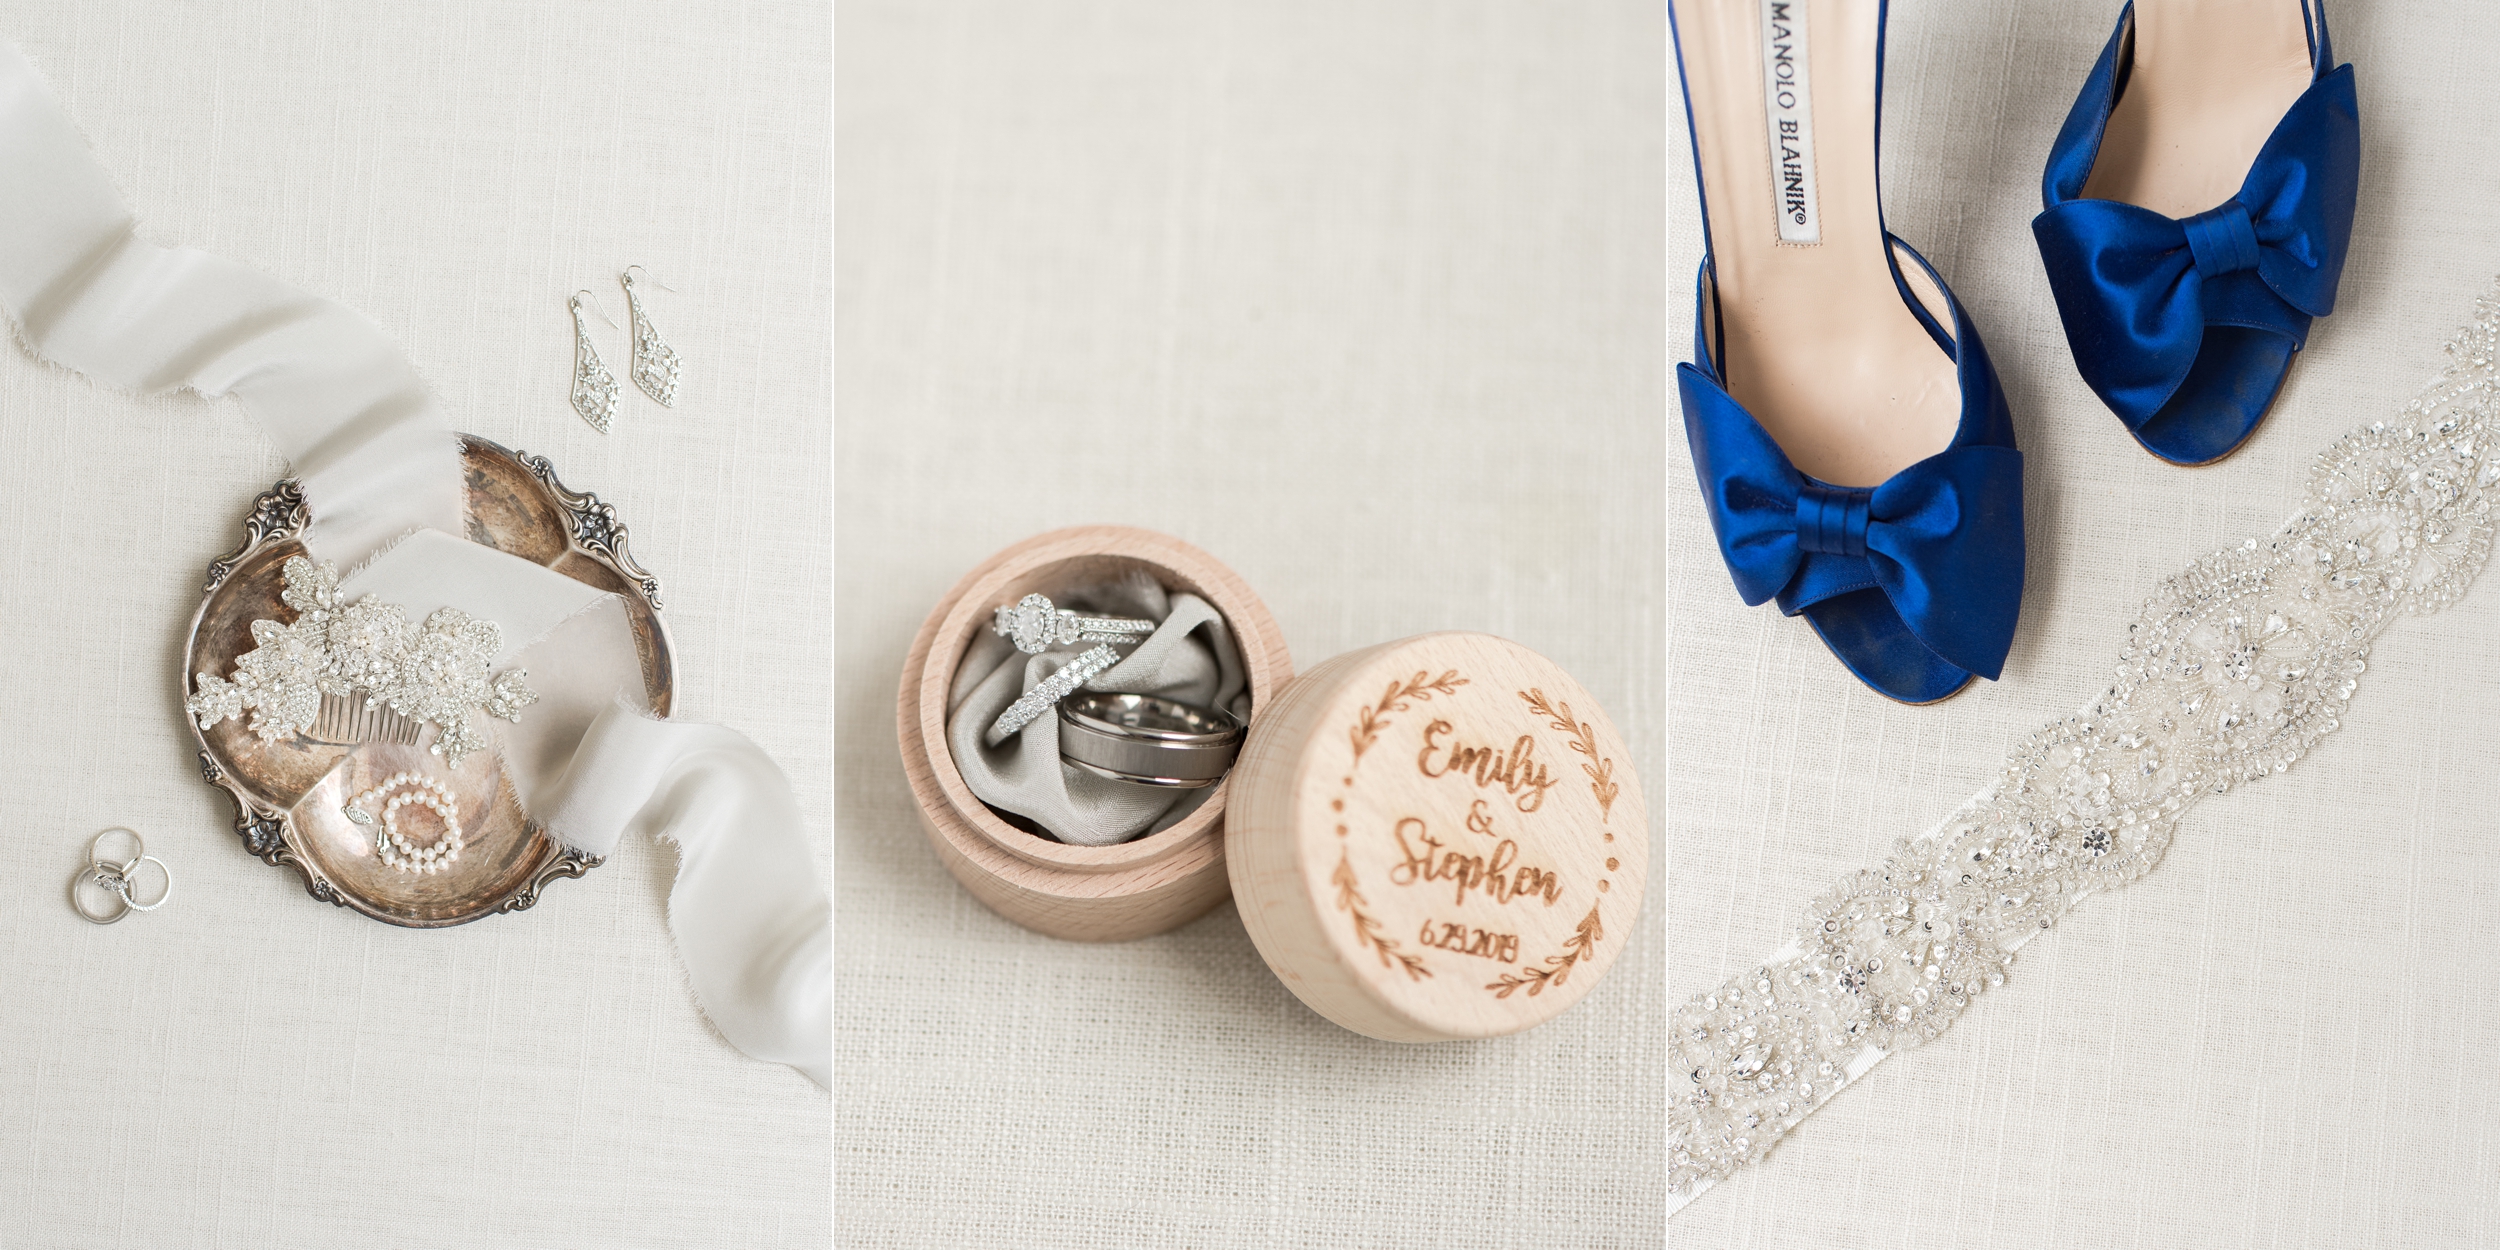 styled bridal details wooden ring box blue manolo blahnik shoes with bows and beaded comb